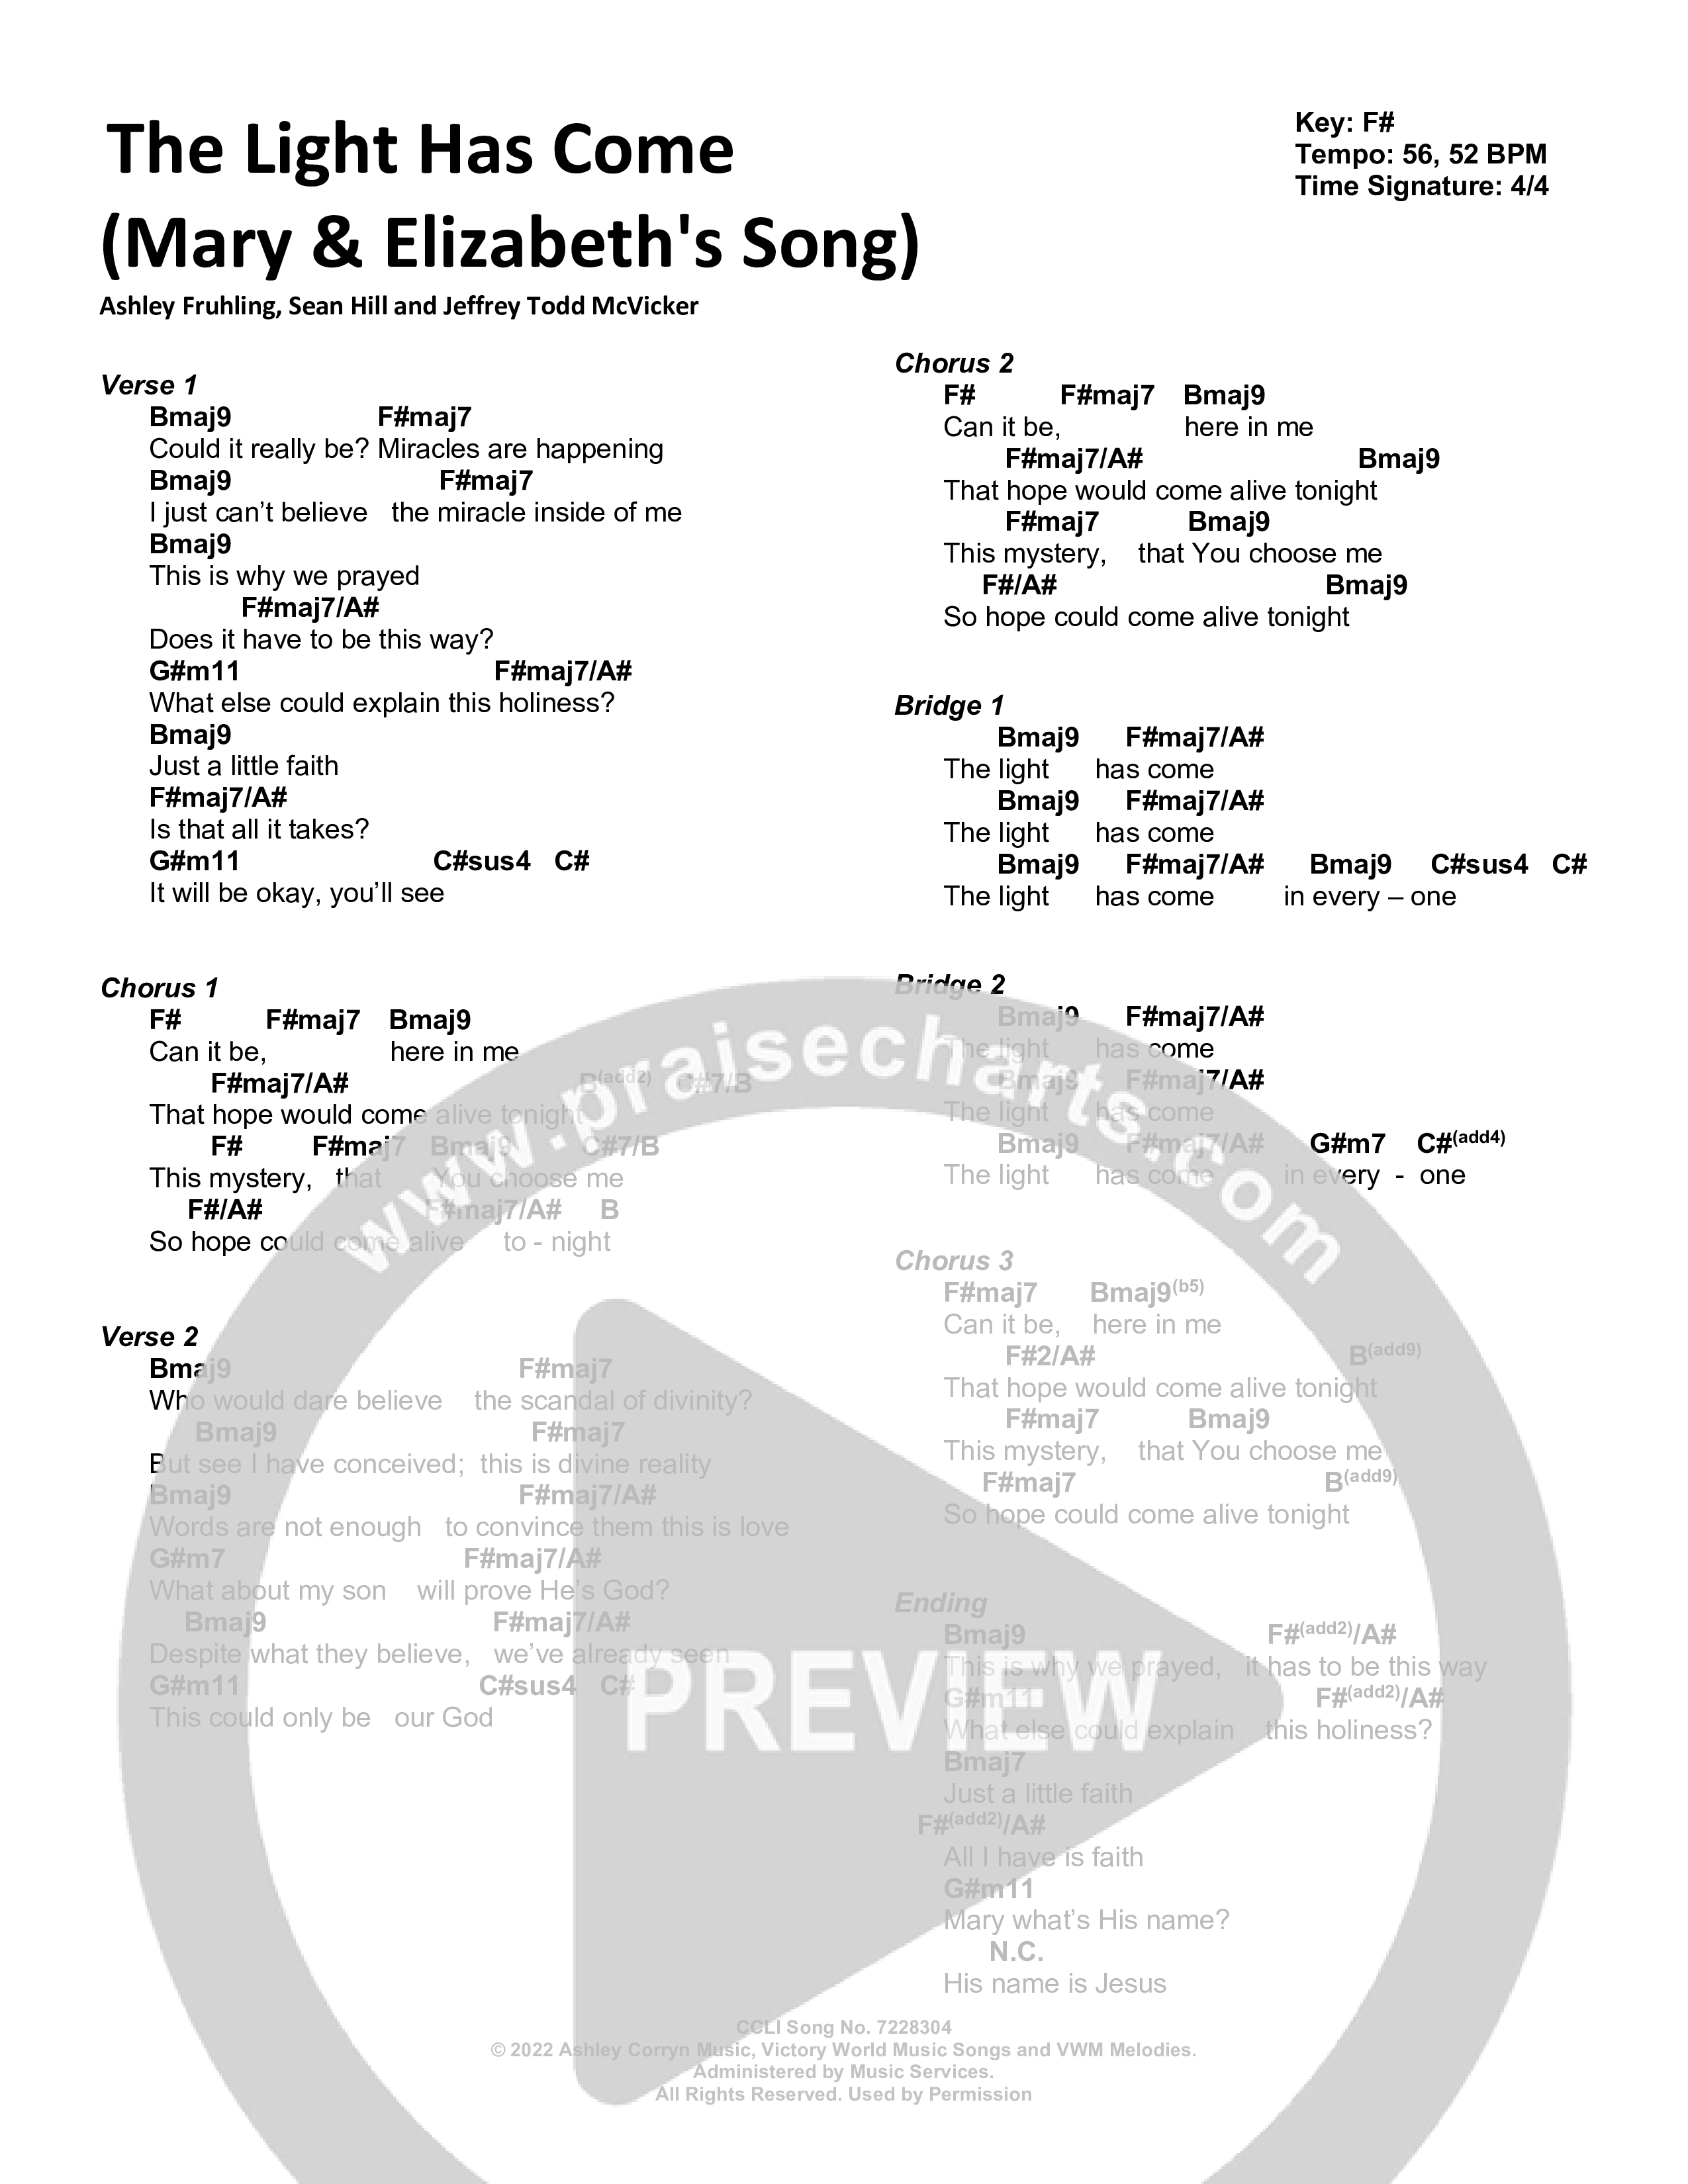 The Light Has Come (Mary & Elizabeth's Song) Chord Chart (Victory House Worship)